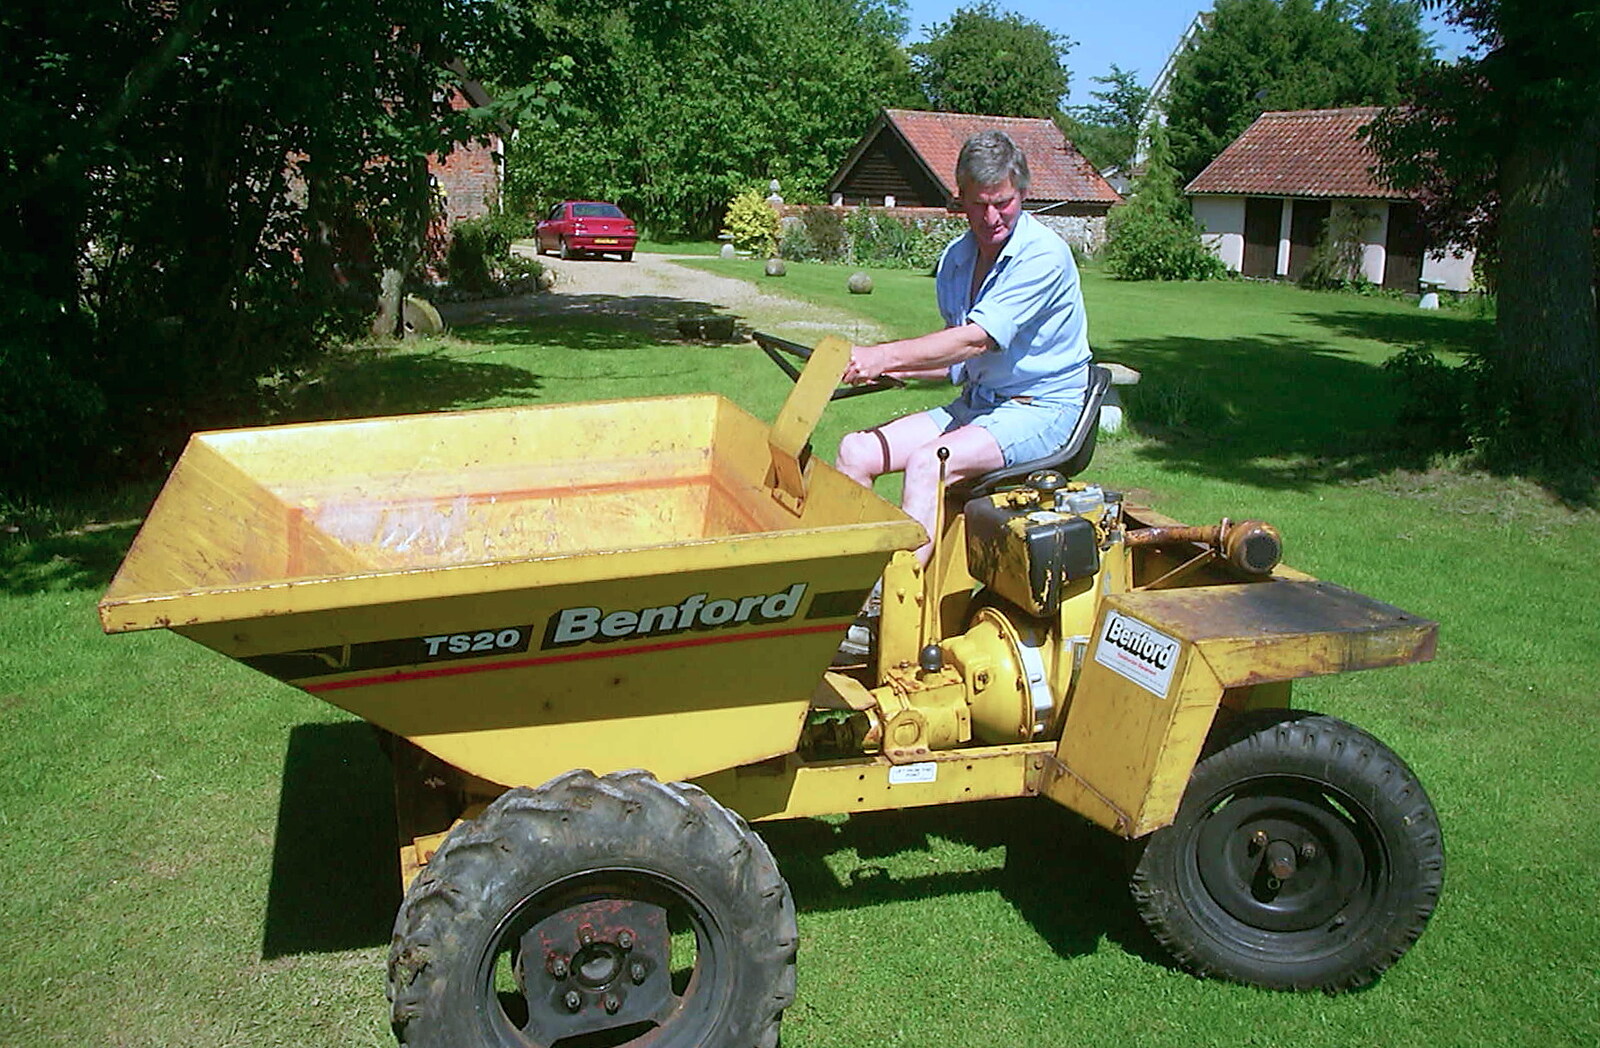 The BSCC at the Victoria, Earl Soham, Suffolk - 27th May 2002: Geoff gets his mini dumper out